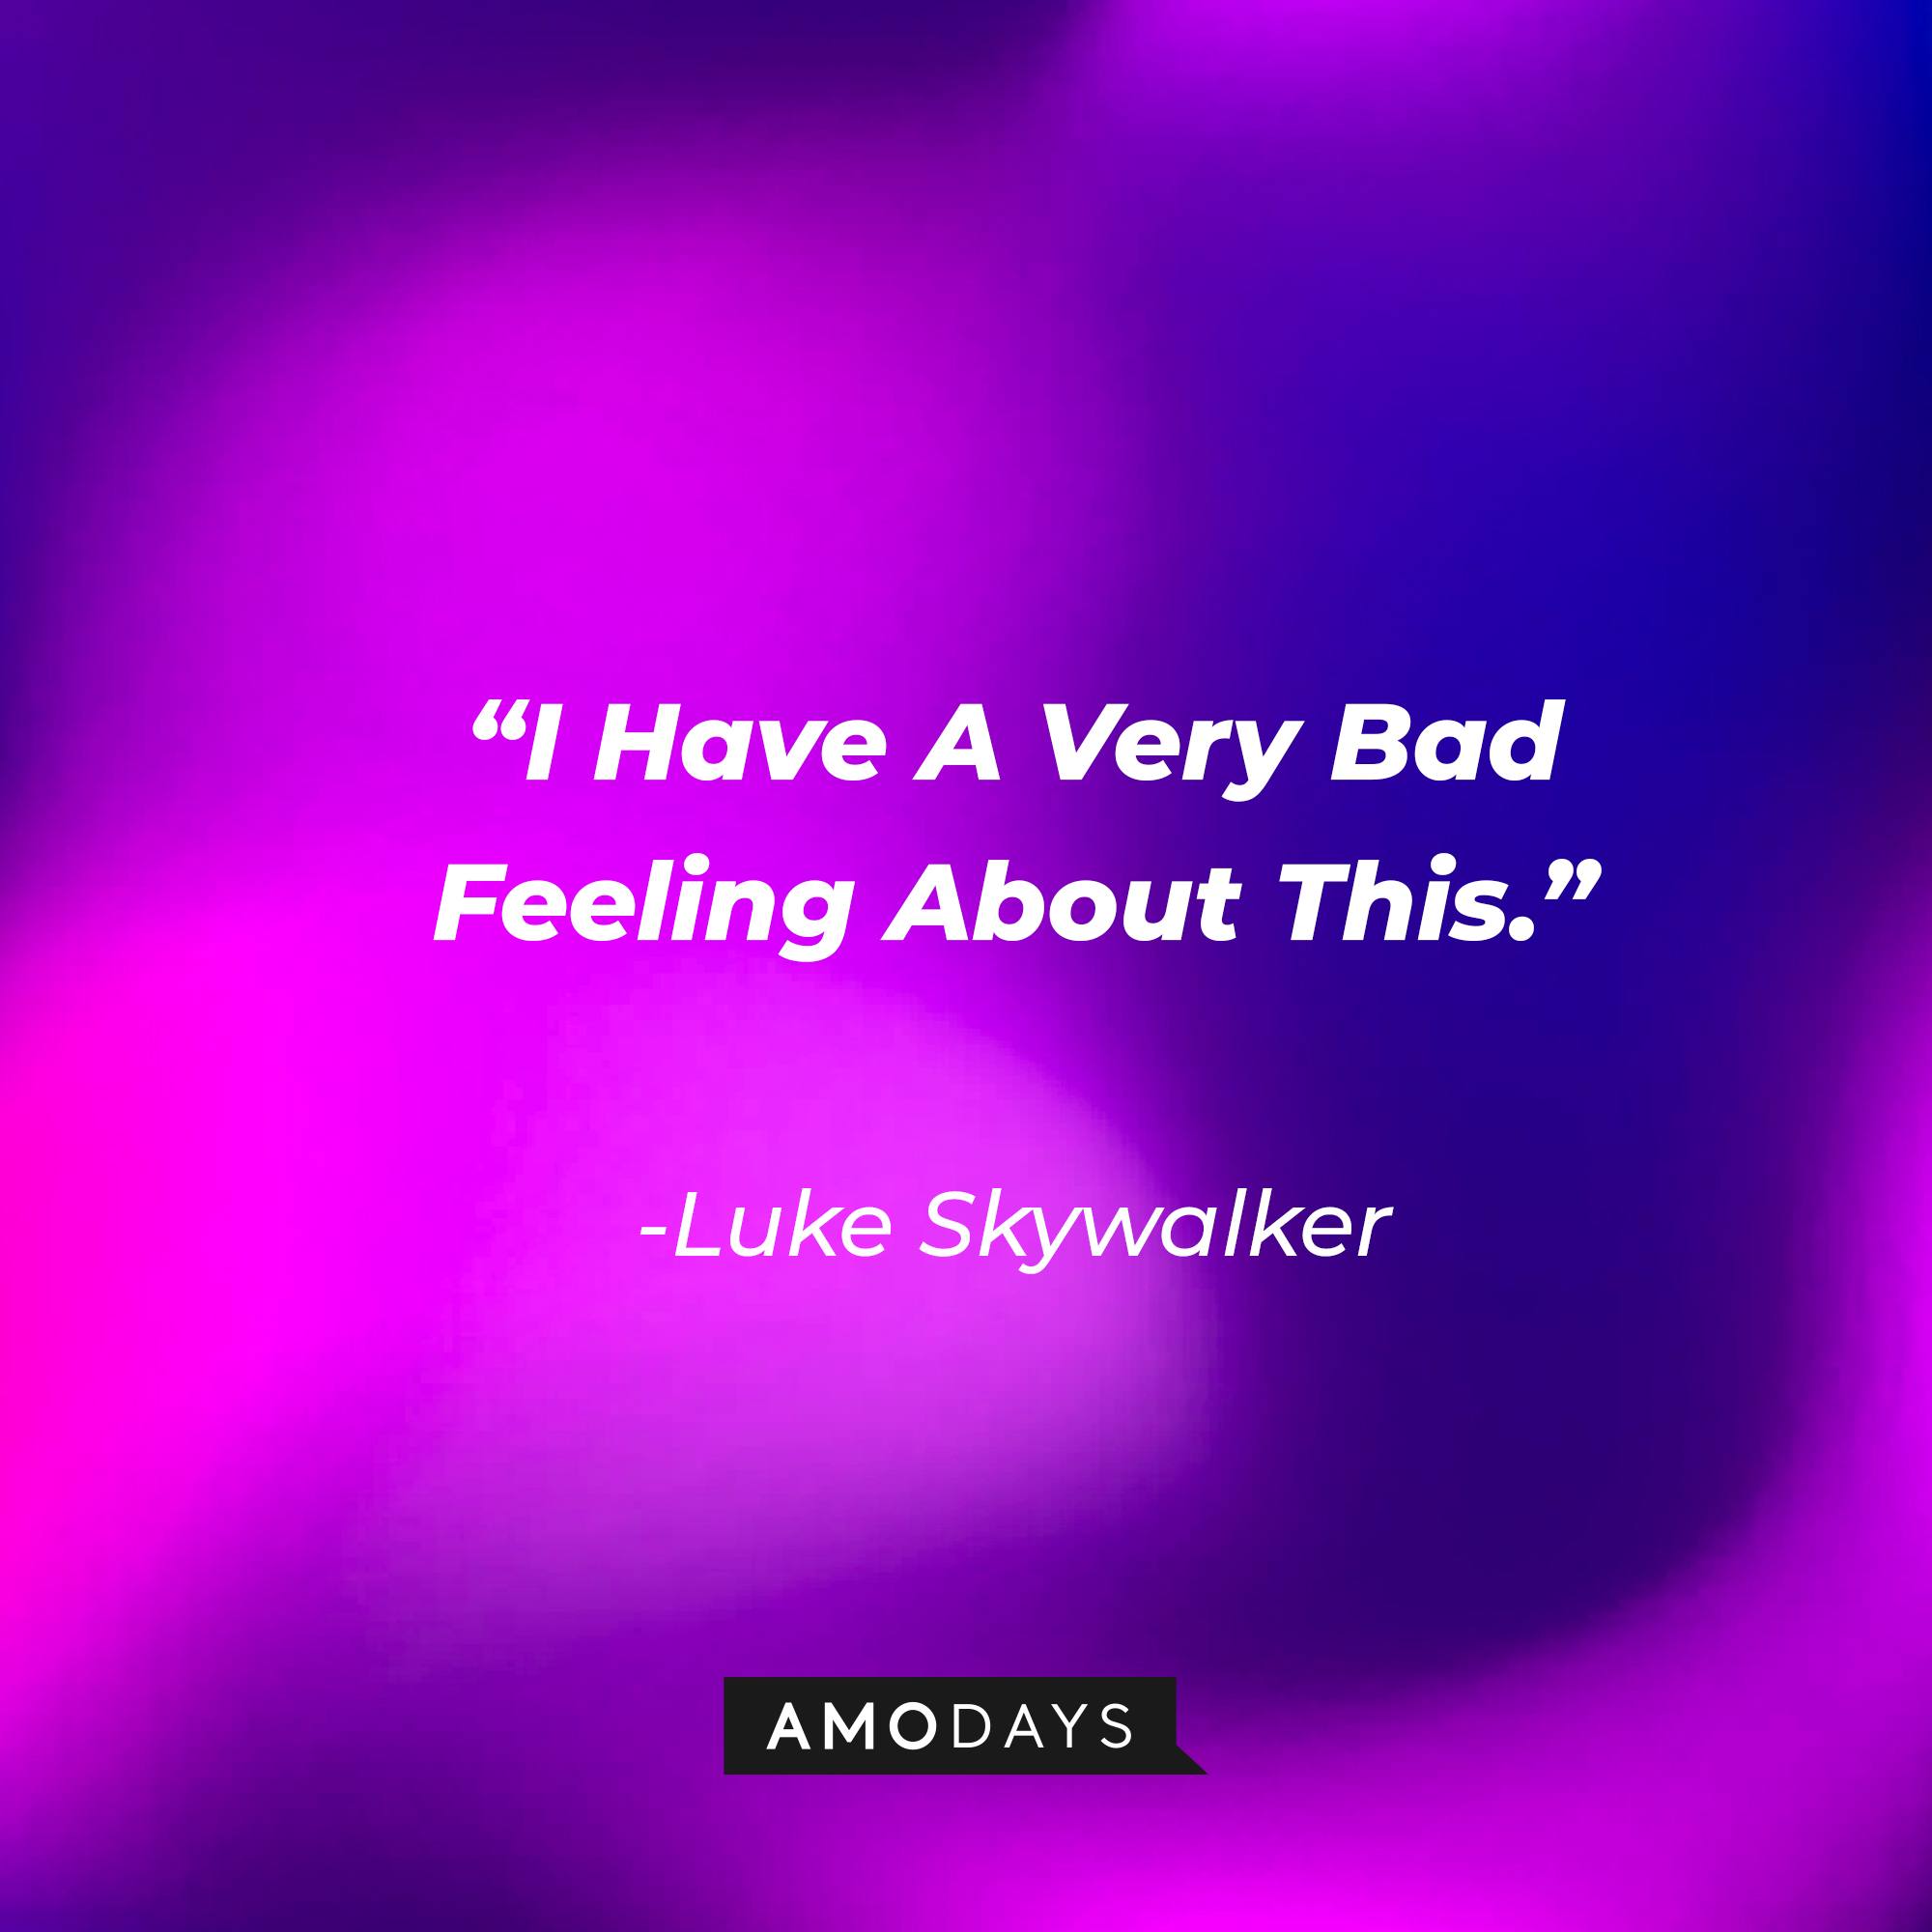 Luke Skywalker's quote: "I Have A Very Bad Feeling About This." | Source: facebook.com/StarWars